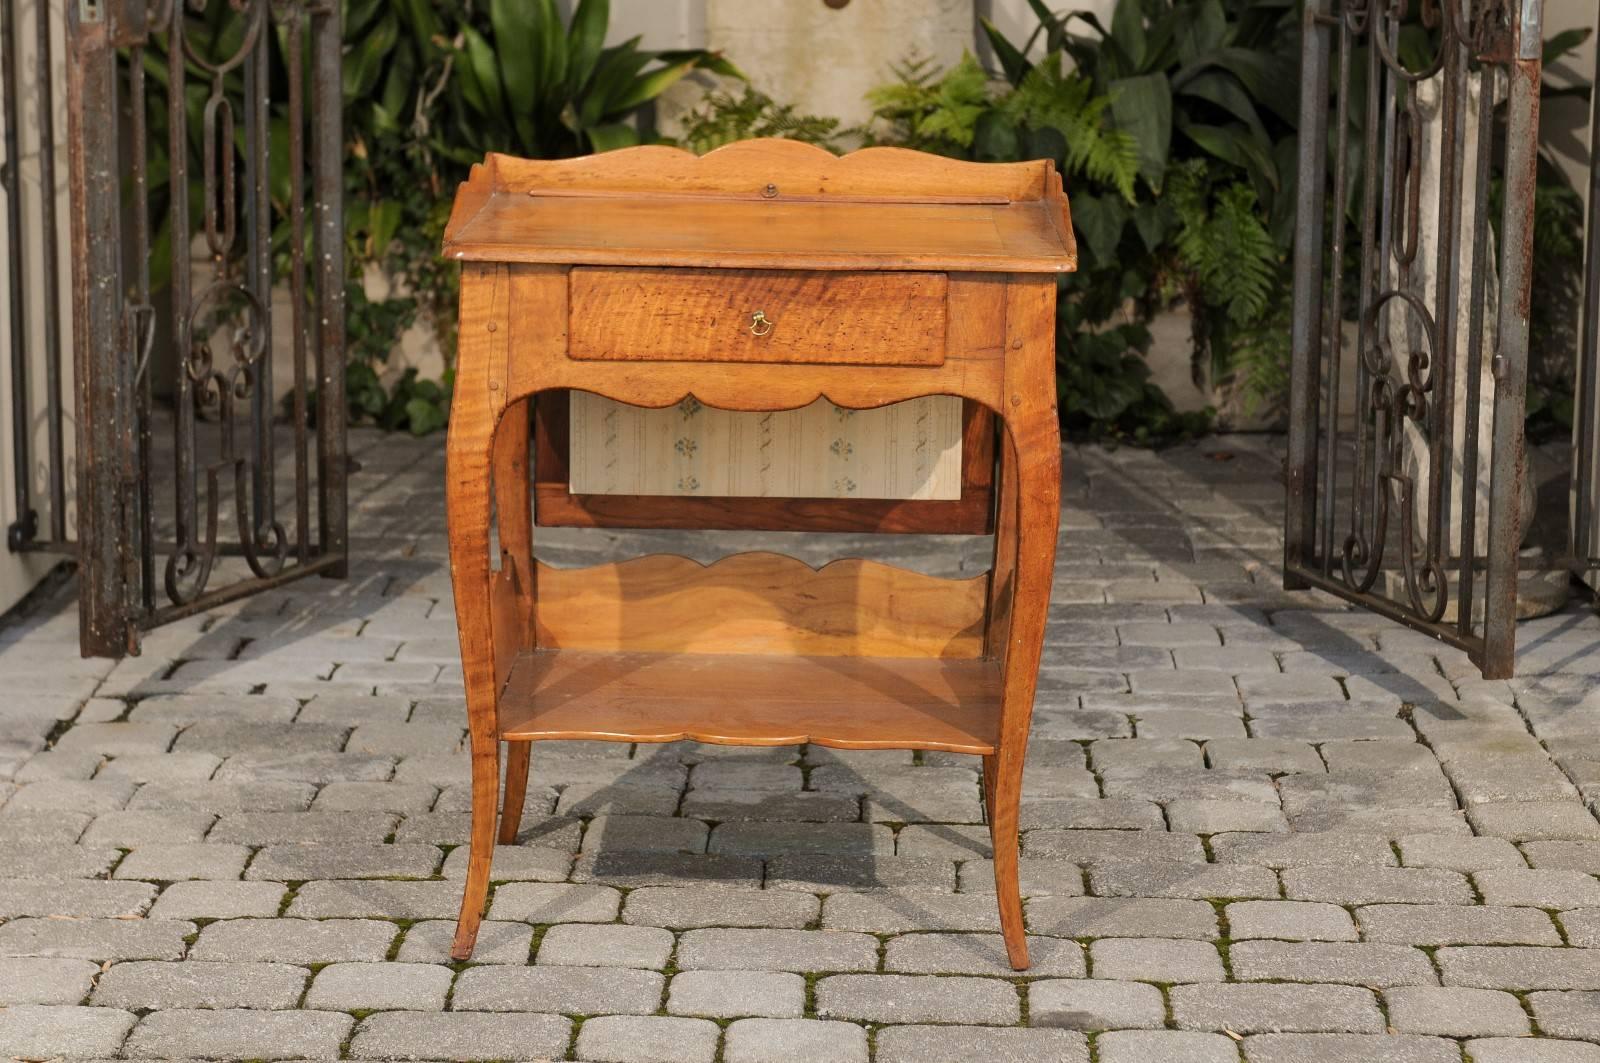 A French fruitwood side table with firescreen, single drawer and lower shelf from the early years of the 19th century. This French fruitwood side table features a rectangular top adorned with a nicely scalloped three-quarter wooden gallery, sitting